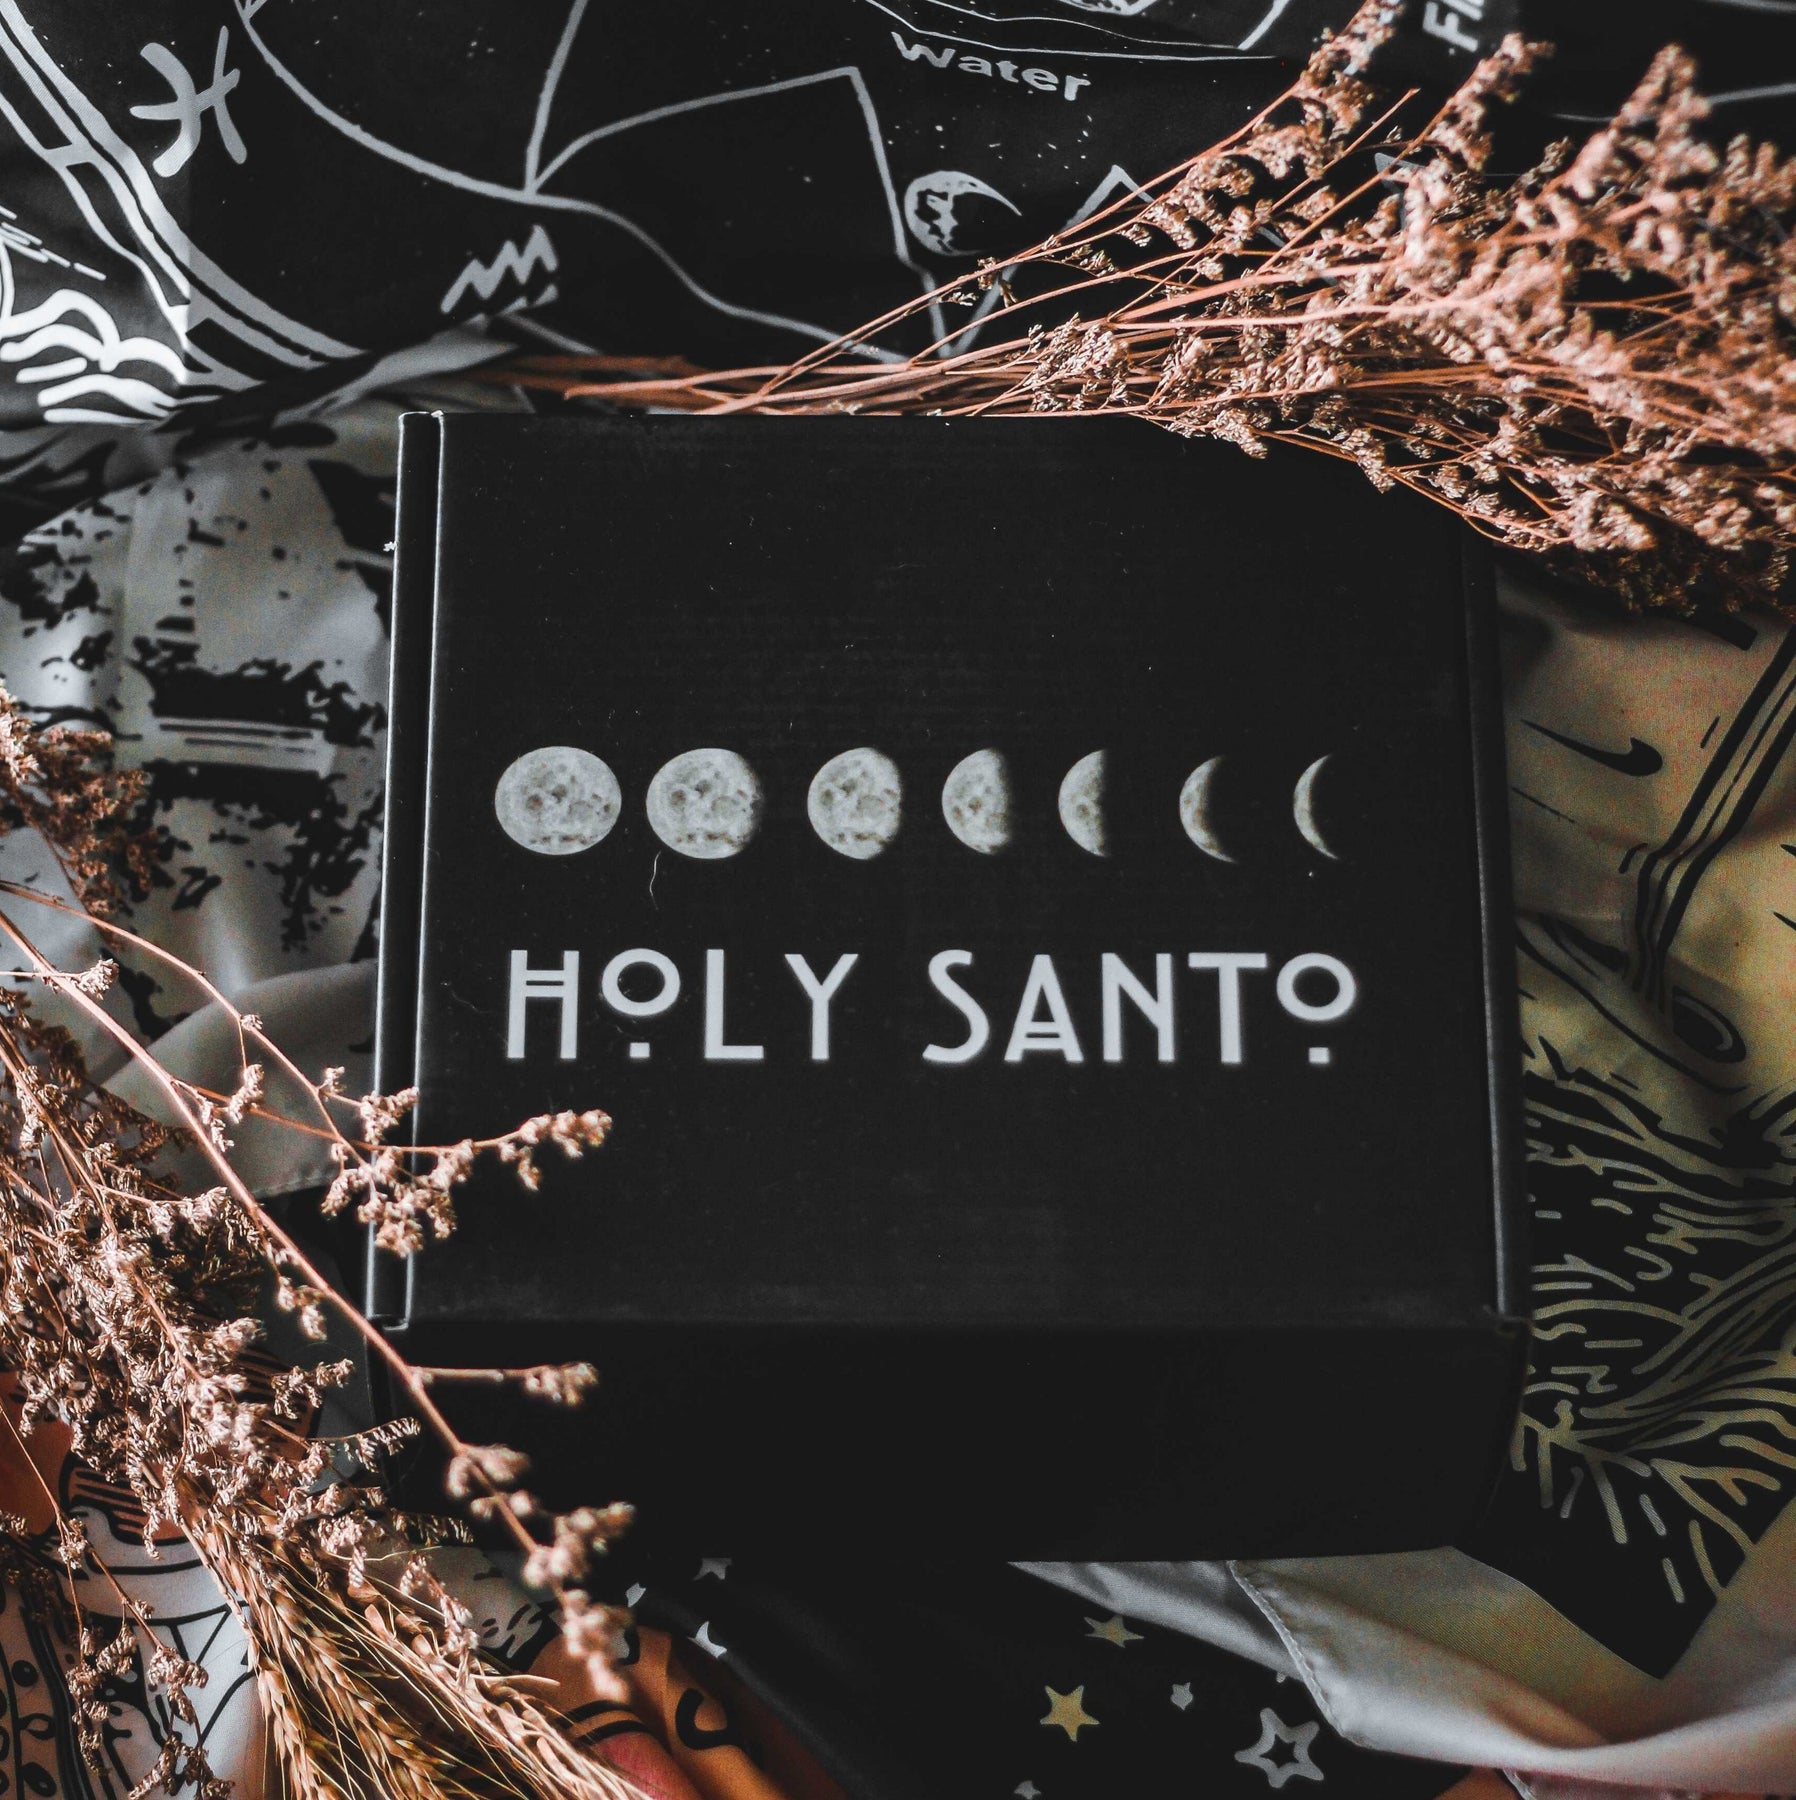 Holy Santo Organic Dried Herbs for Witchcraft Algeria